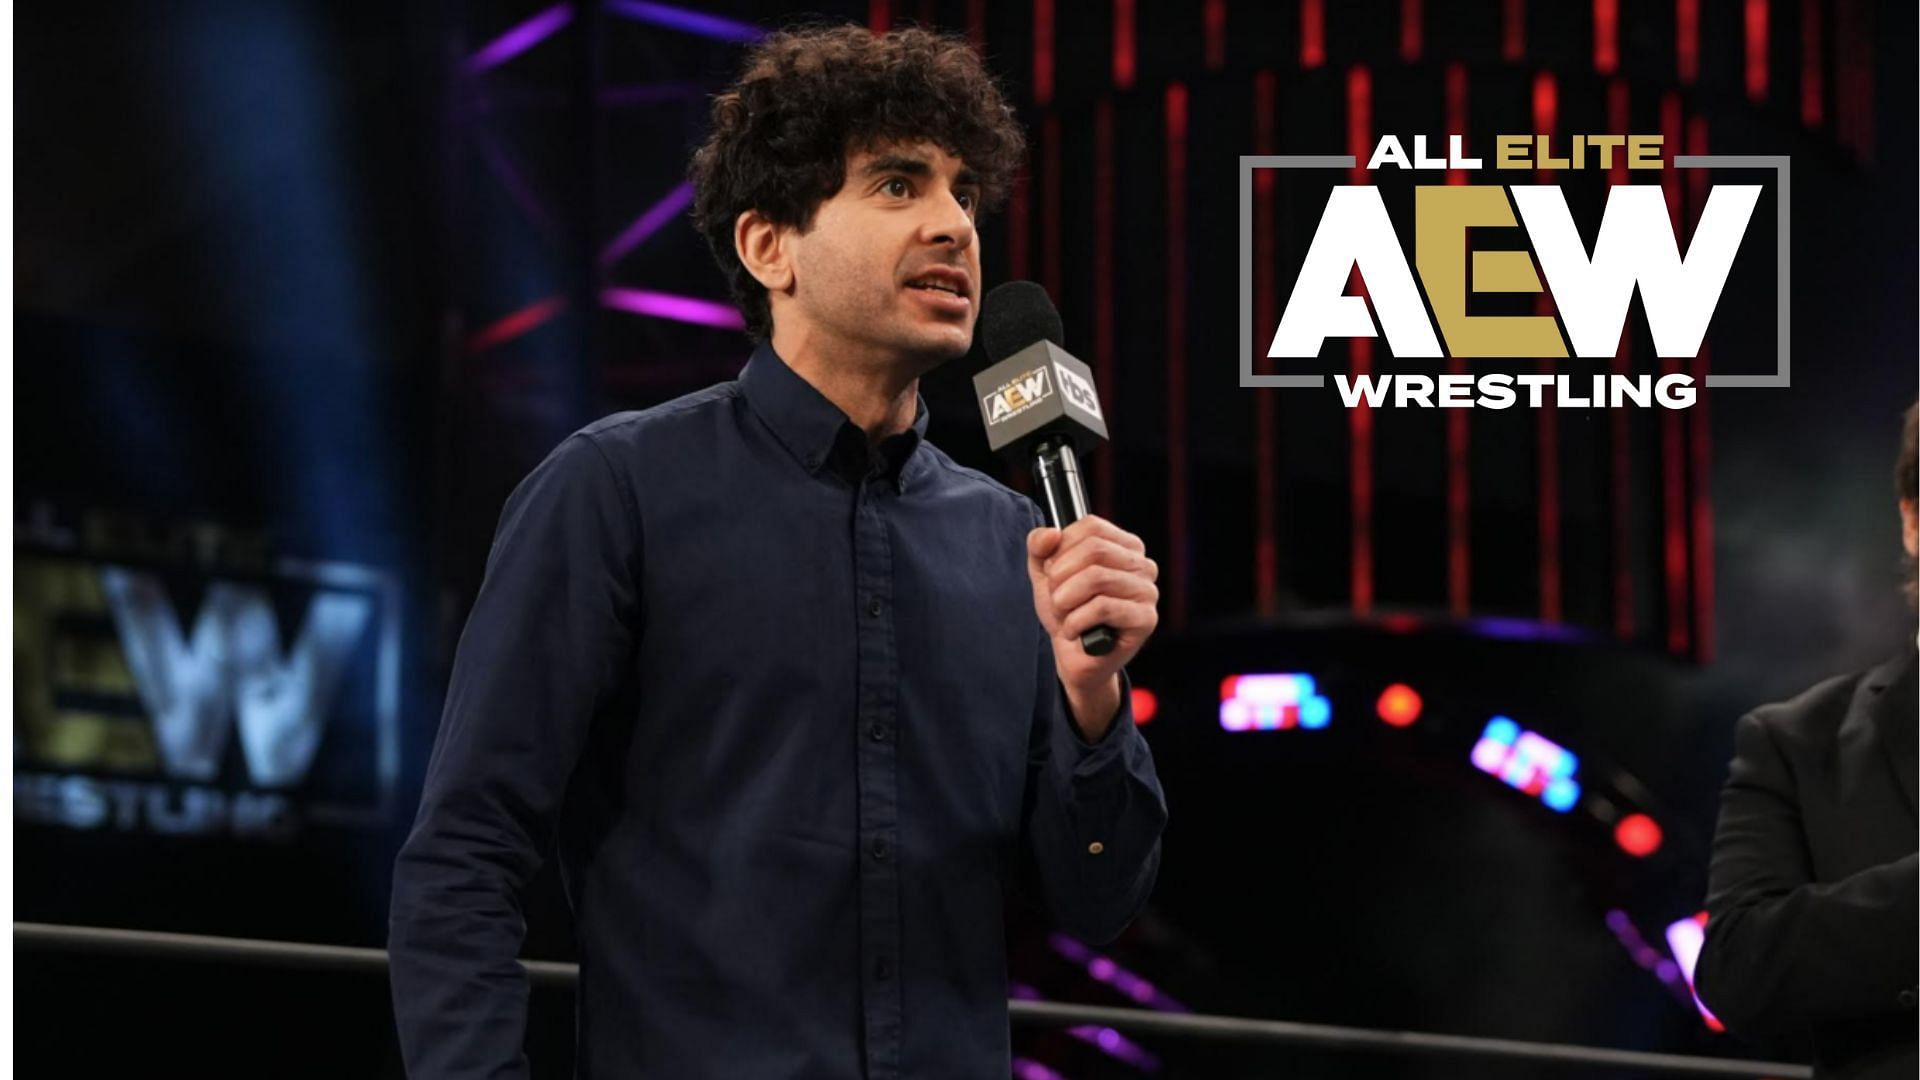 AEW President Tony Khan has once more received criticism from a WWE legend